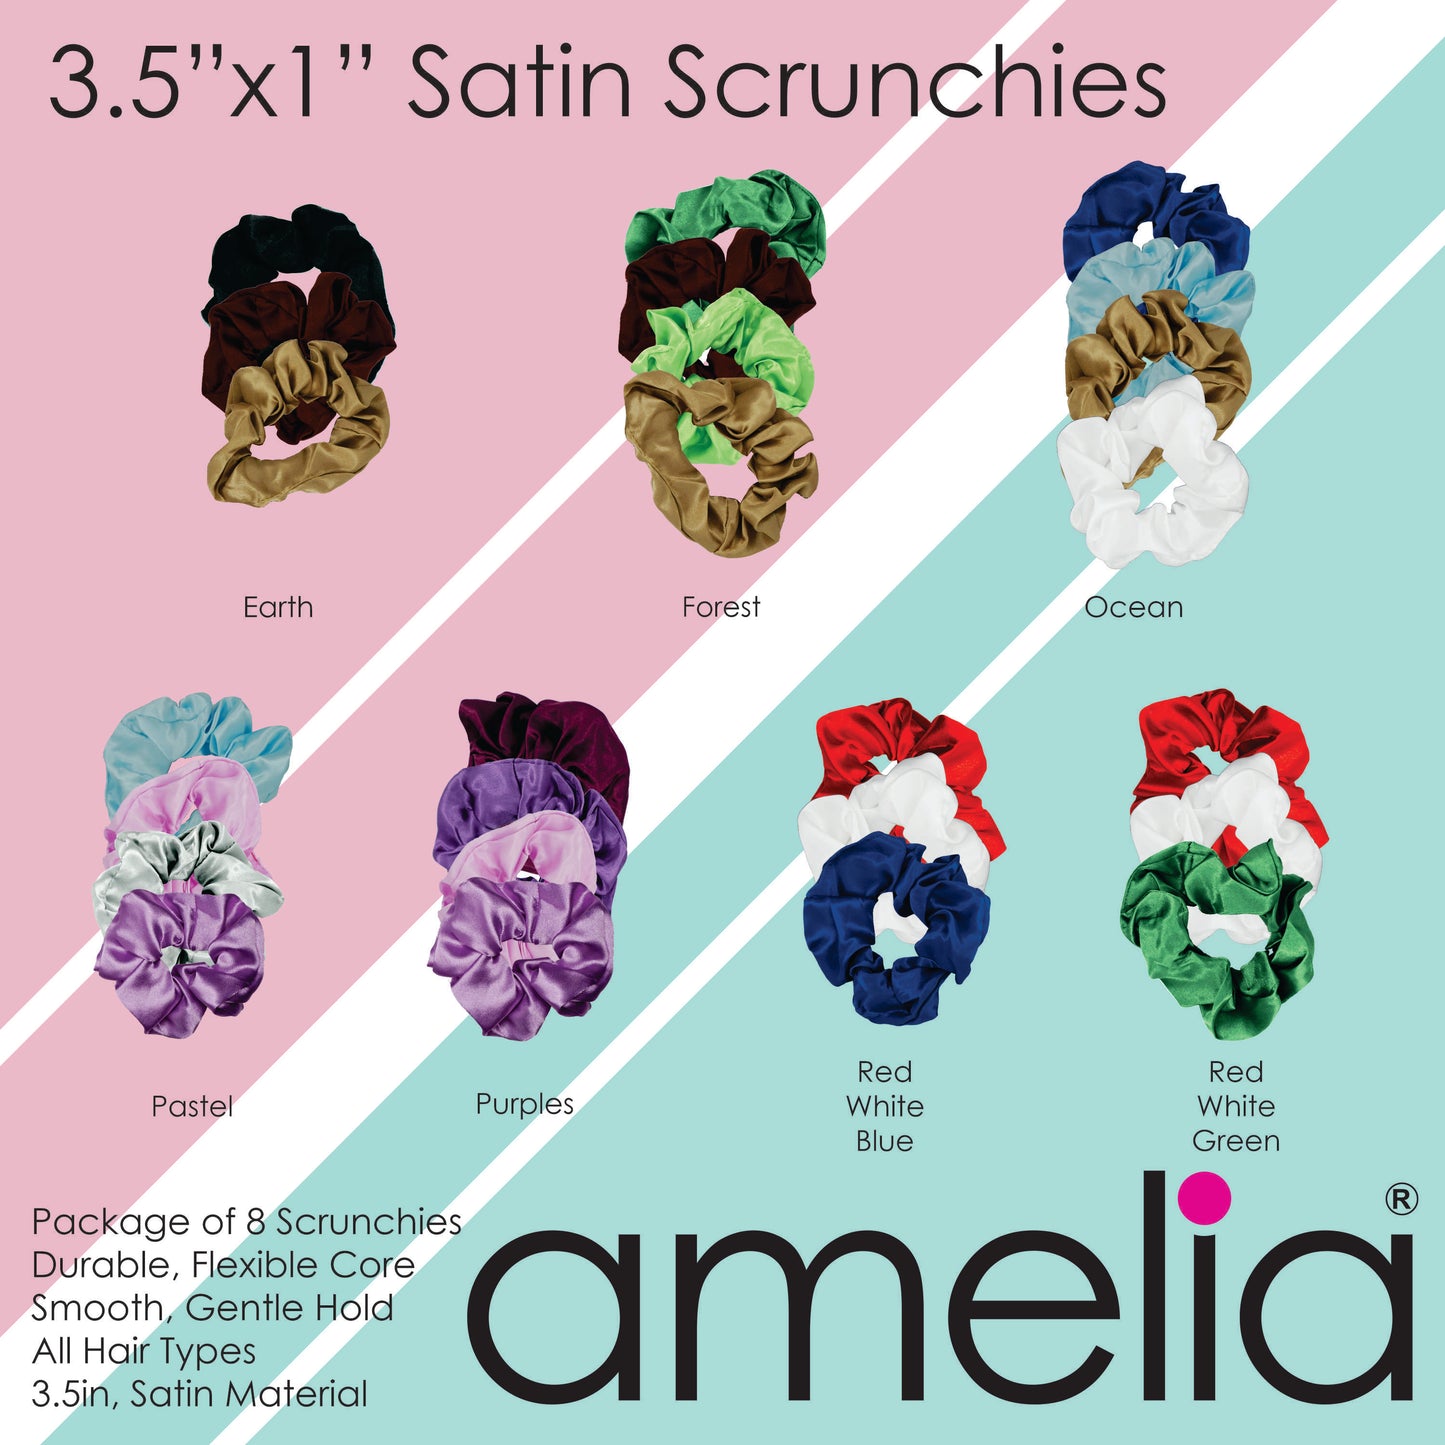 Amelia Beauty Products, Gray Imitation Silk Scrunchies, 4.5in Diameter, Gentle on Hair, Strong Hold, No Snag, No Dents or Creases. 6 Pack